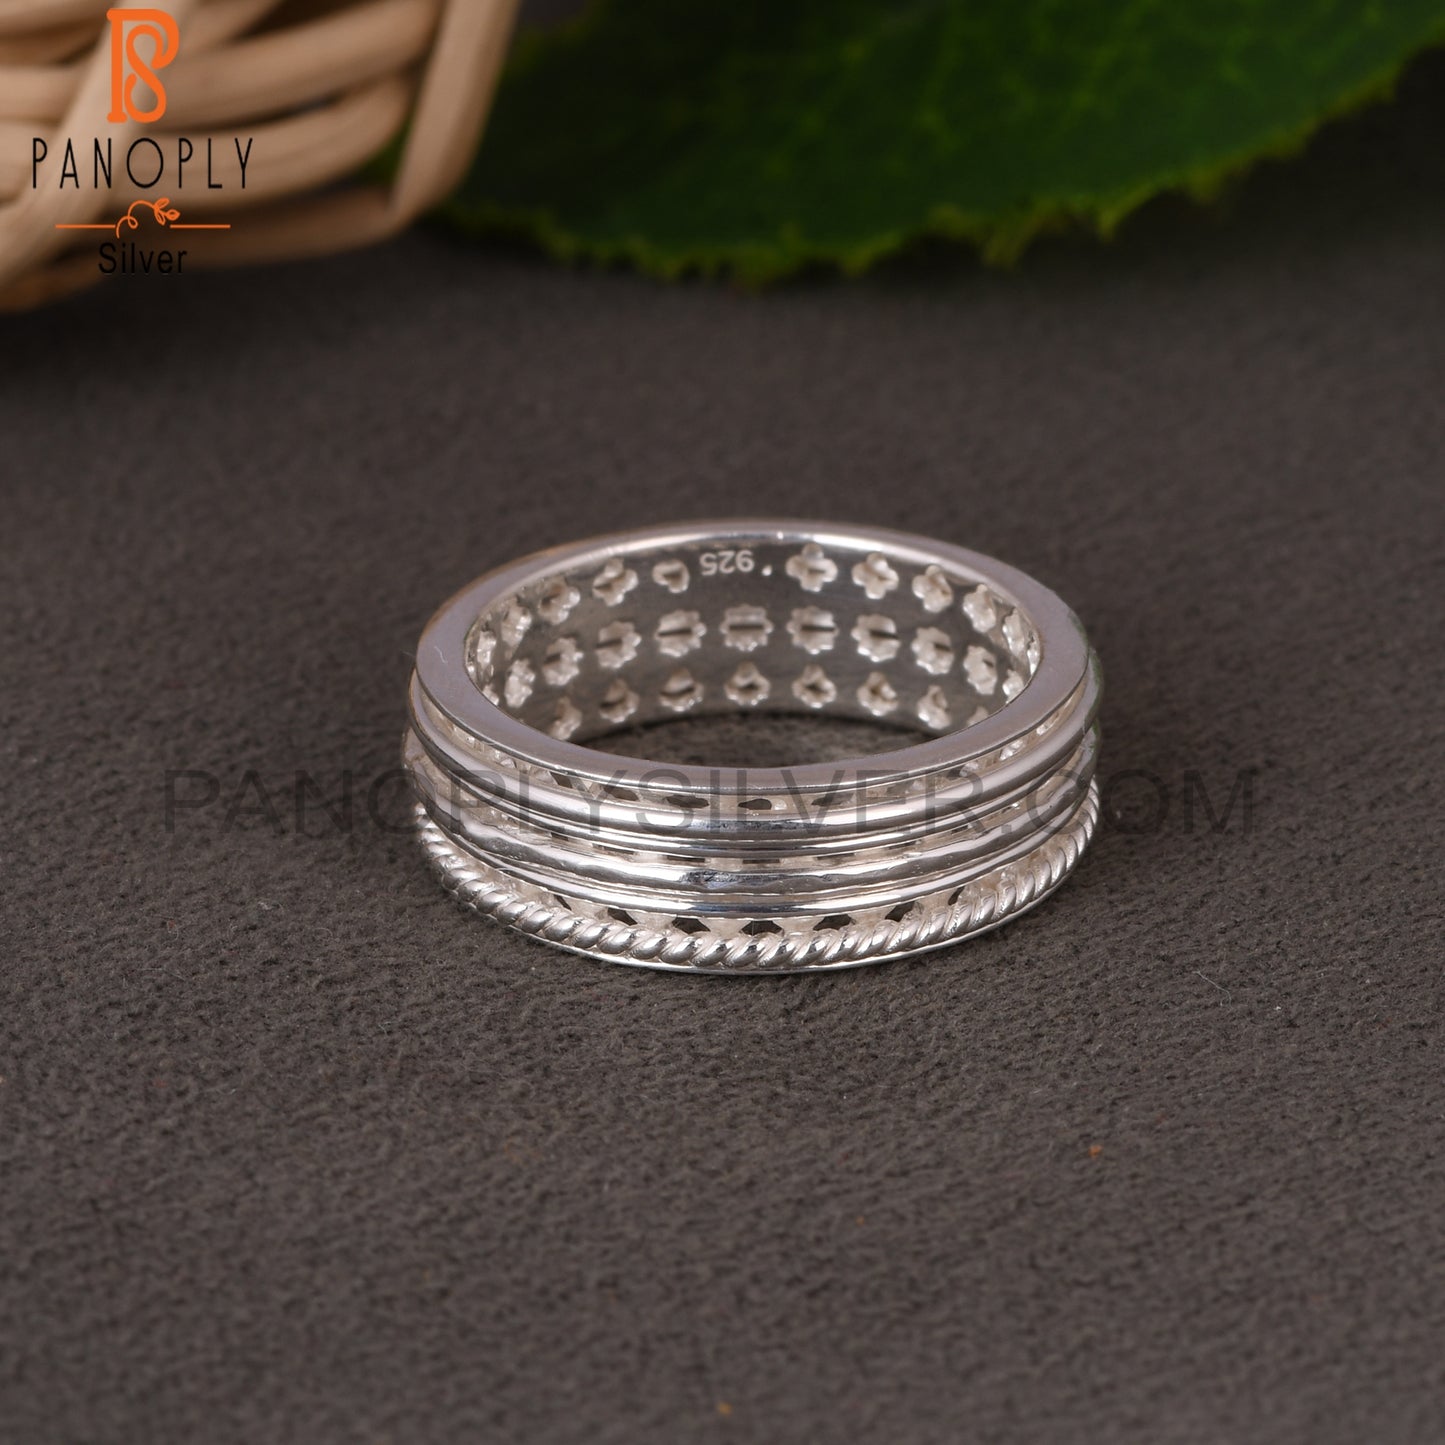 Triple Wire 925 Sterling Silver Plain Ring Band